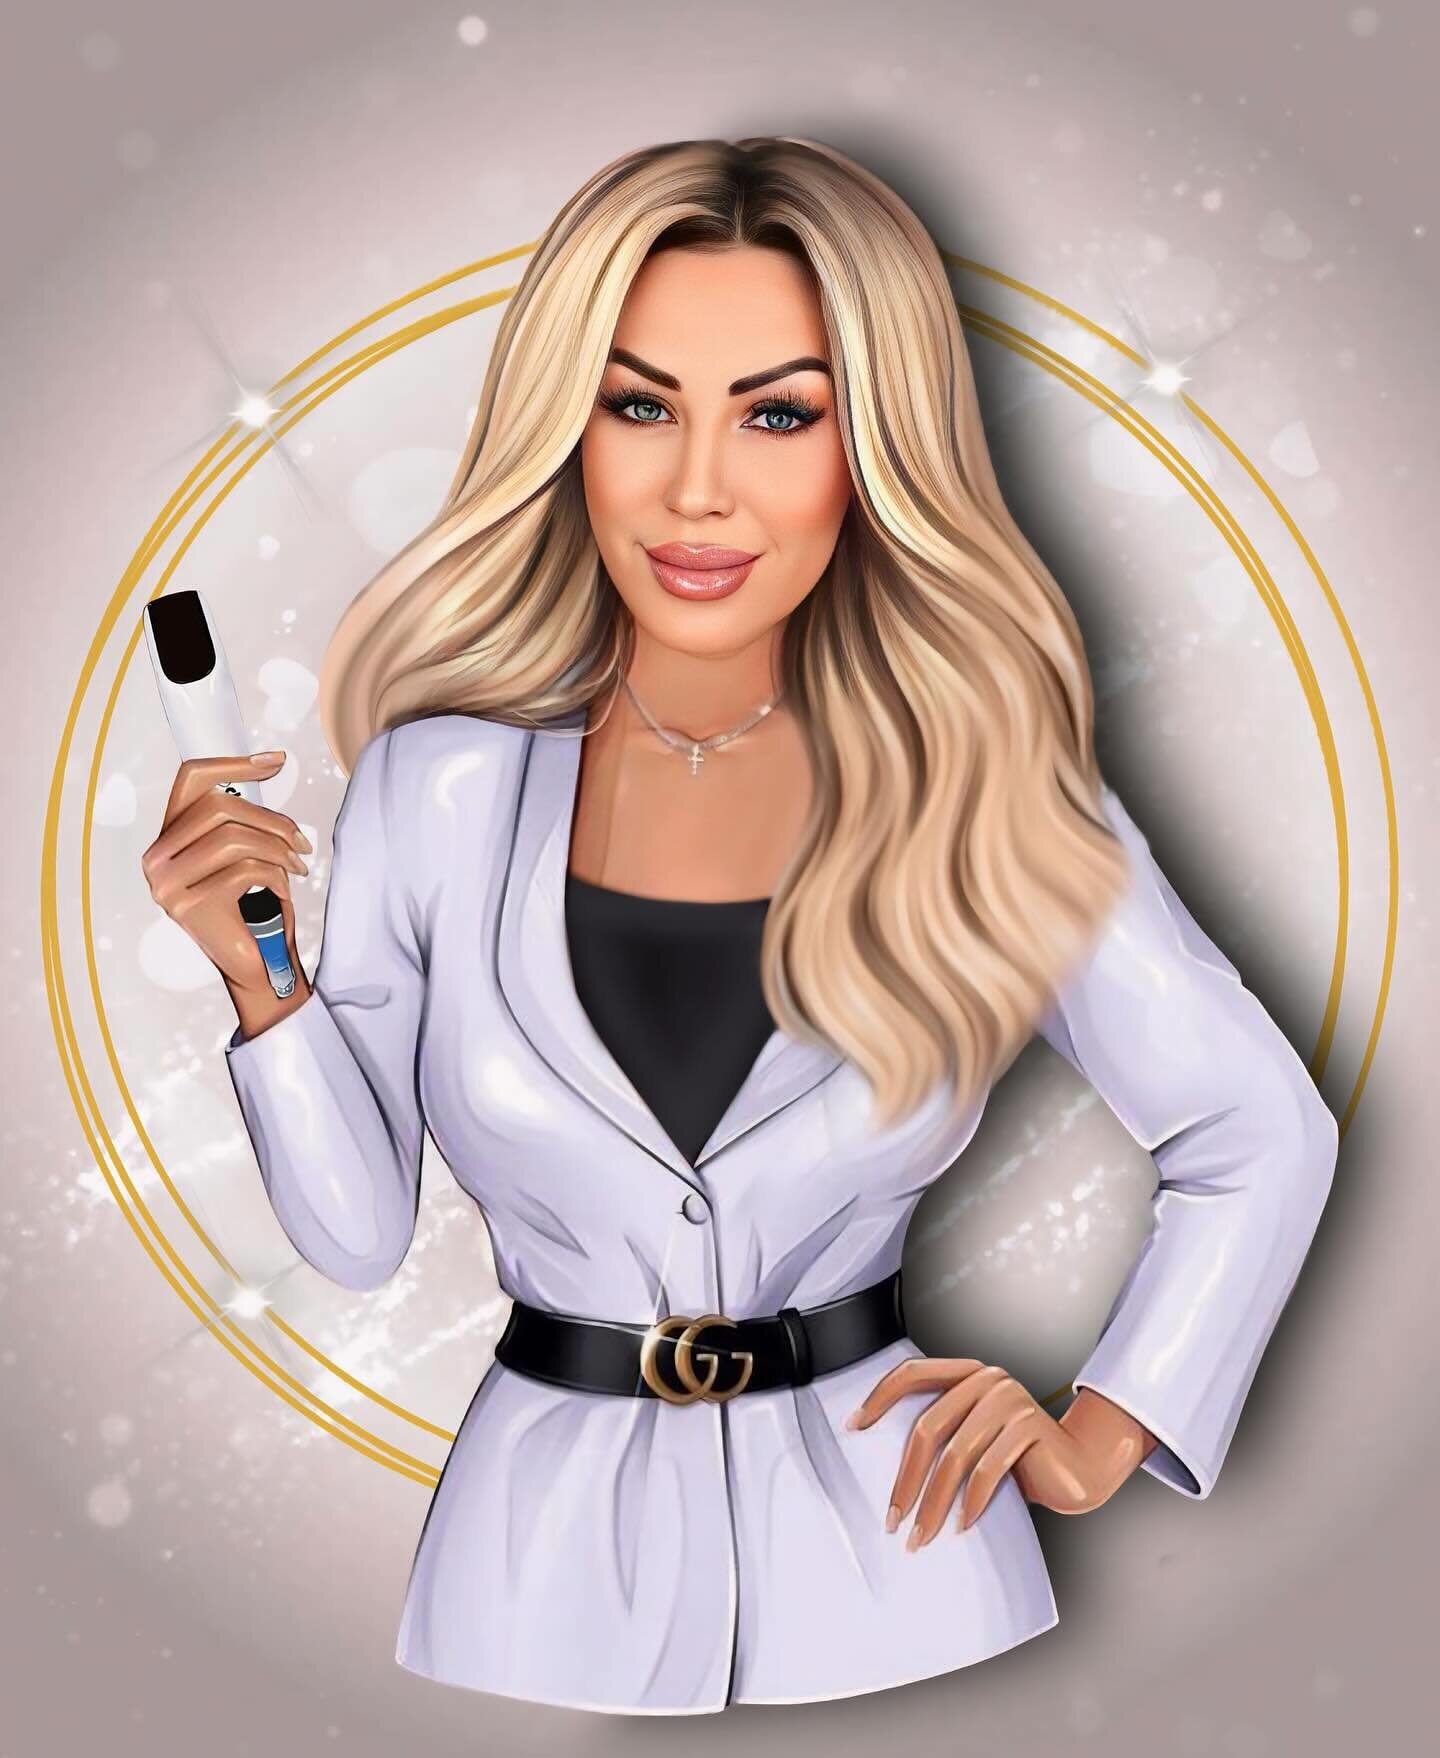 ✨Do what you love! &amp; Love what you do!✨ #yourskincaredealer 

I love what I do it&rsquo;s my true passion!!🤍 Thank you @cartoon_pog2 for creating this amazing beauty cartoon logo! Just love it! 🙌🏻